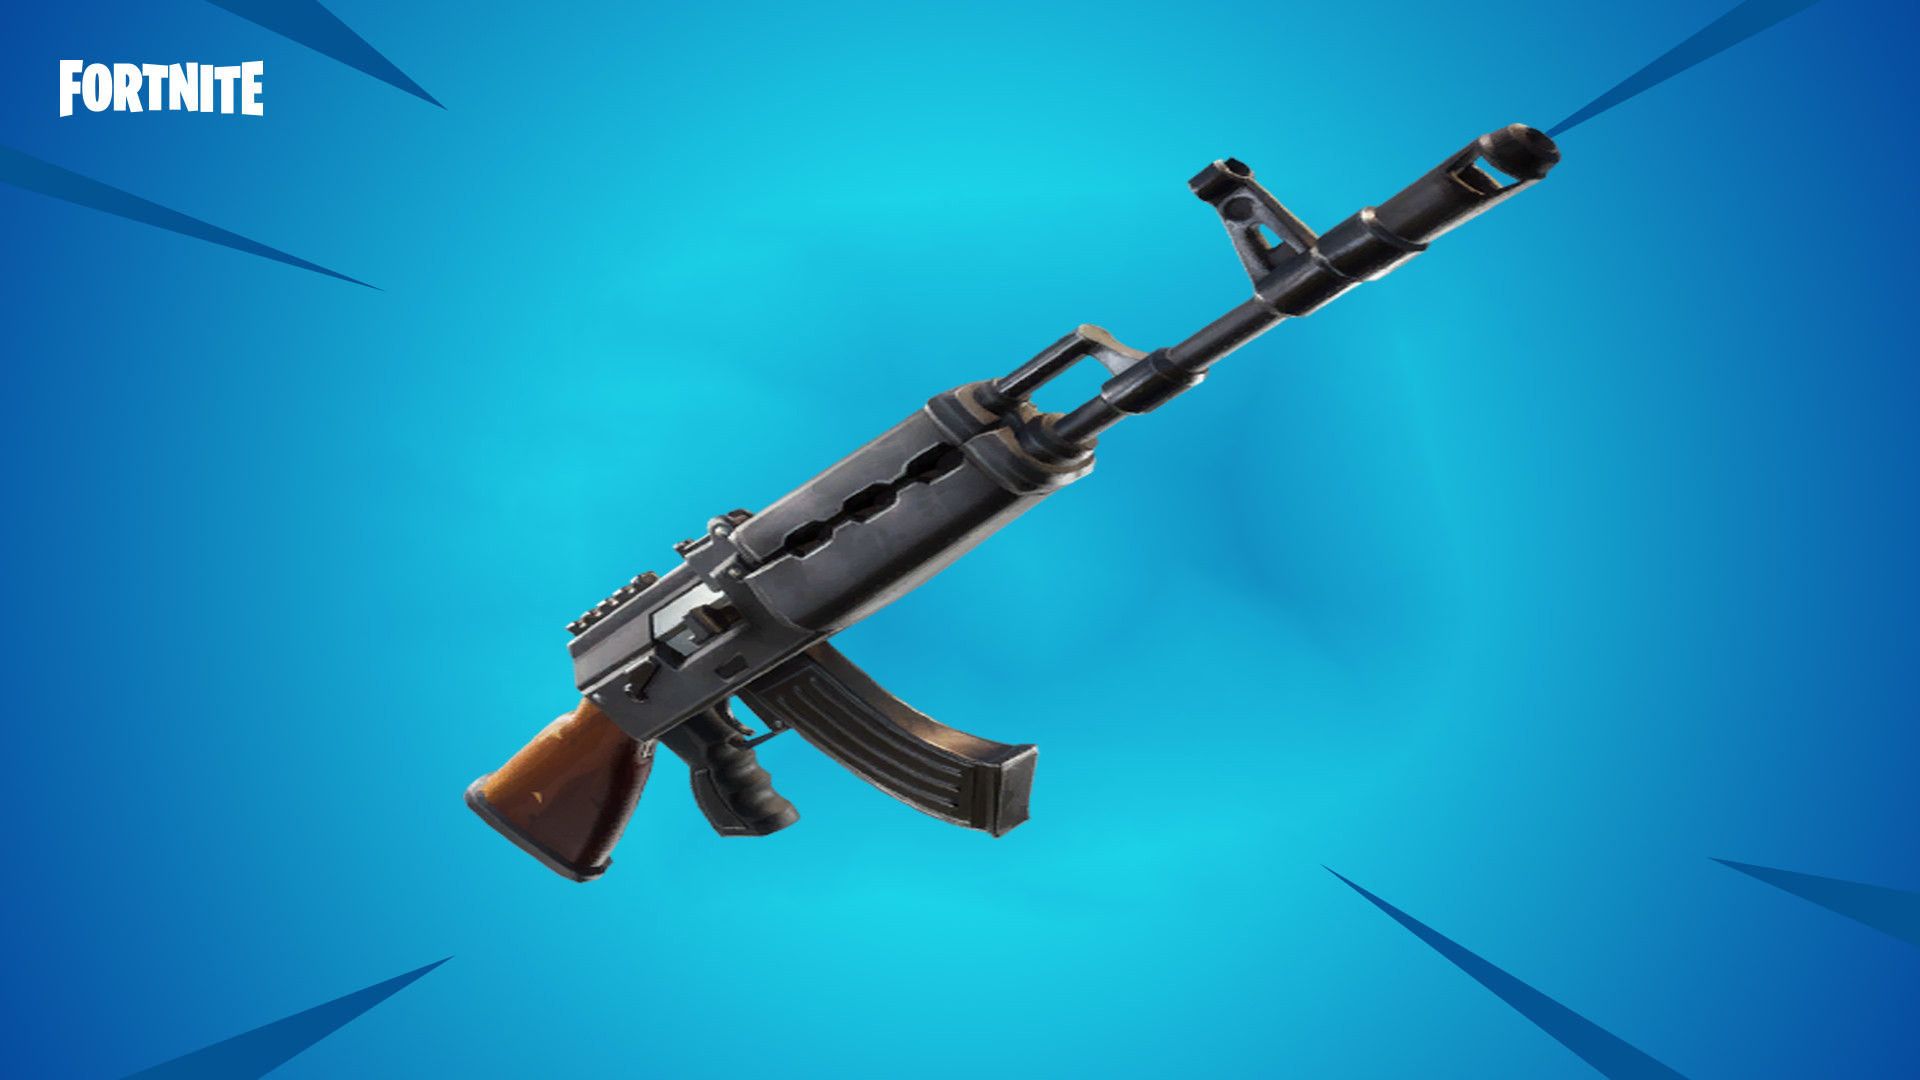 Every Weapon In Fortnite Ranked